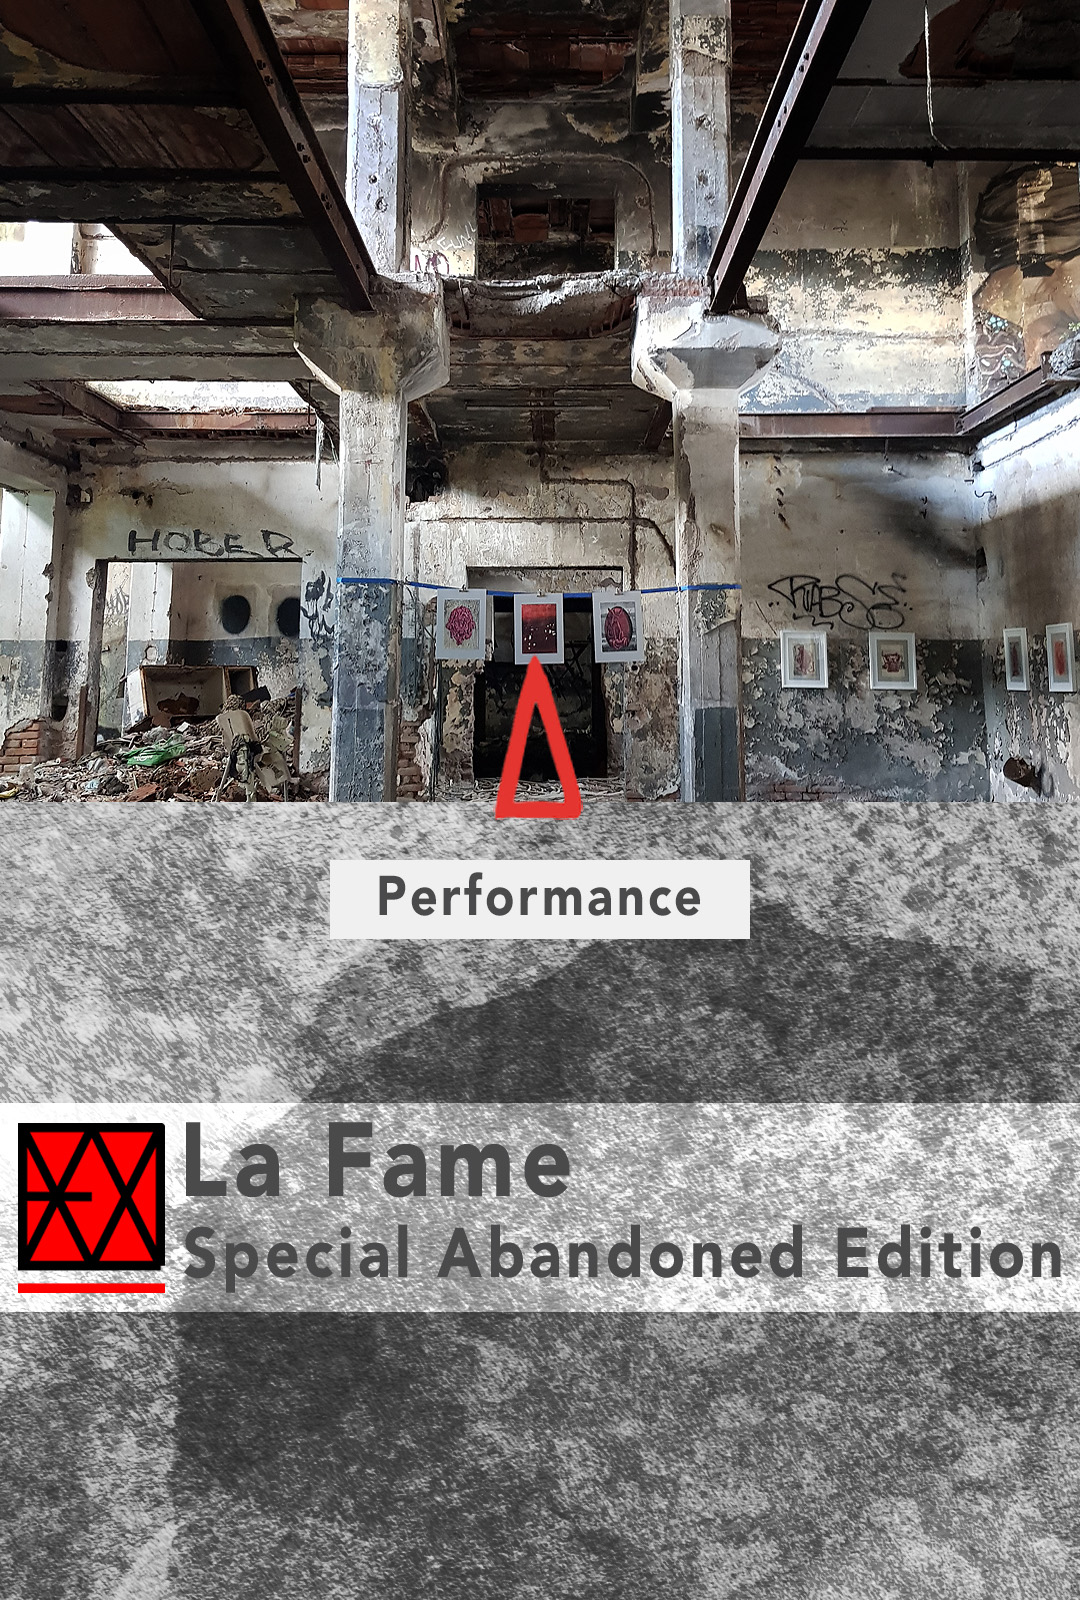 Performance: LA FAME special abandoned edition